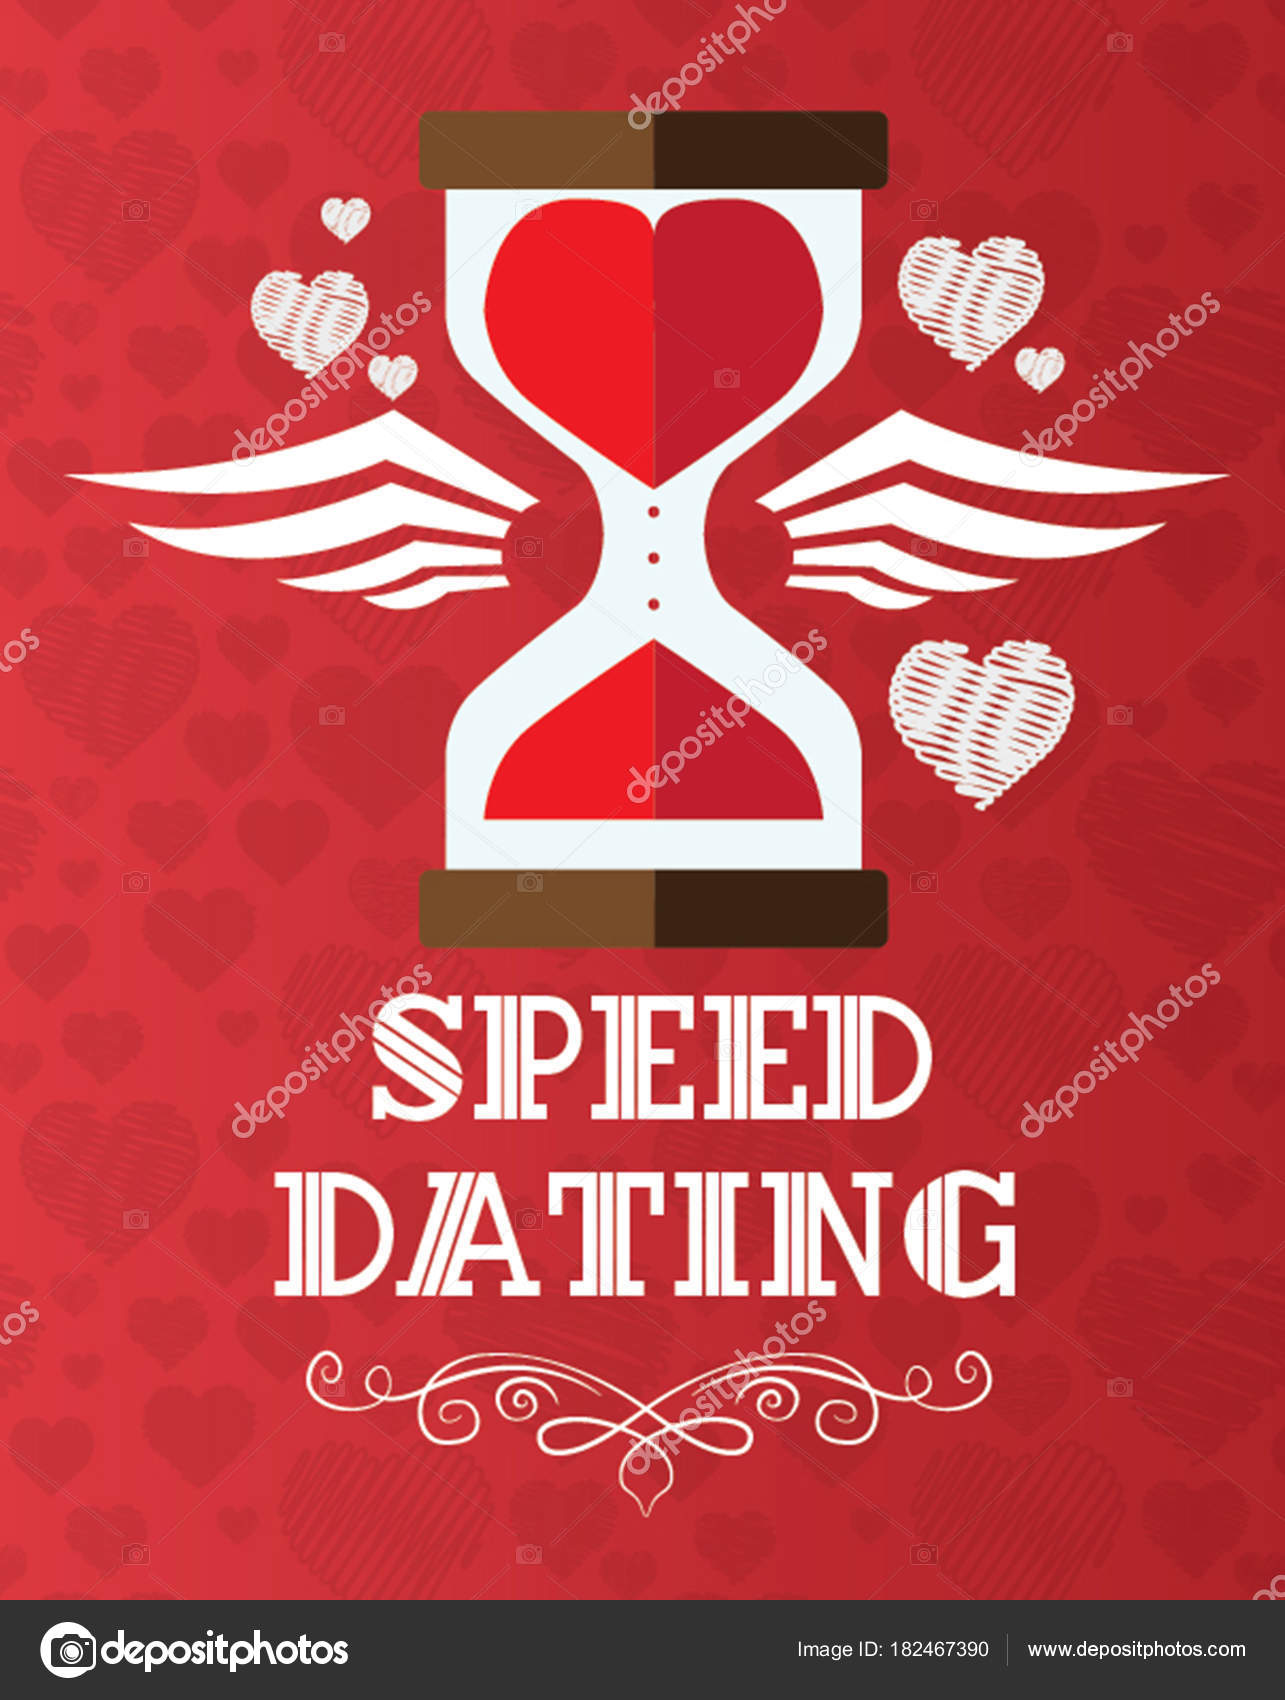 sula speed dating norway)